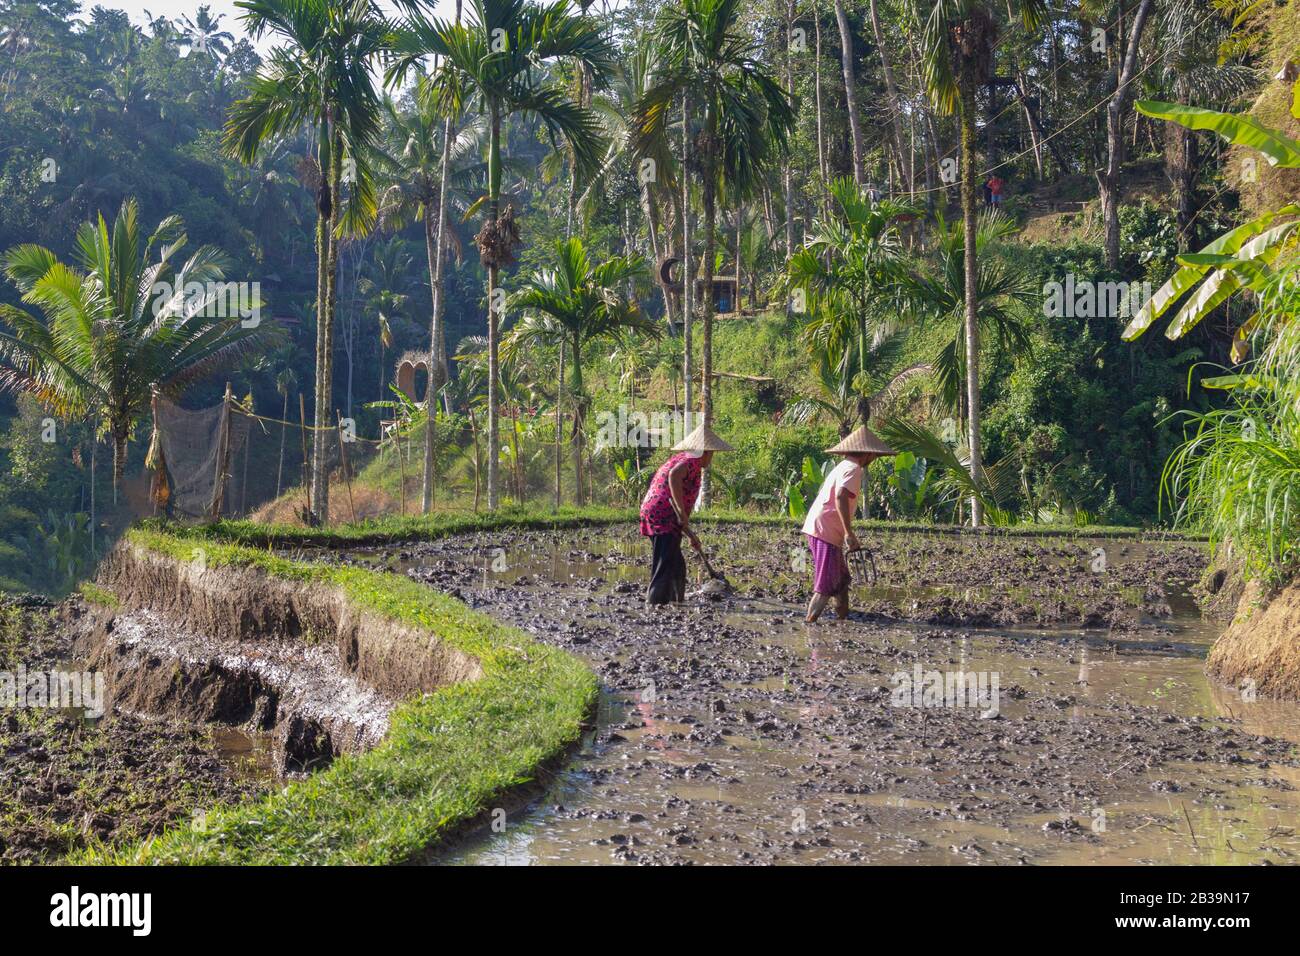 Bali Indonesia 3 Septemper 2019 : Rice field workers.Farmers are planting rice in the fields on rice terraces.Selective focus. Stock Photo